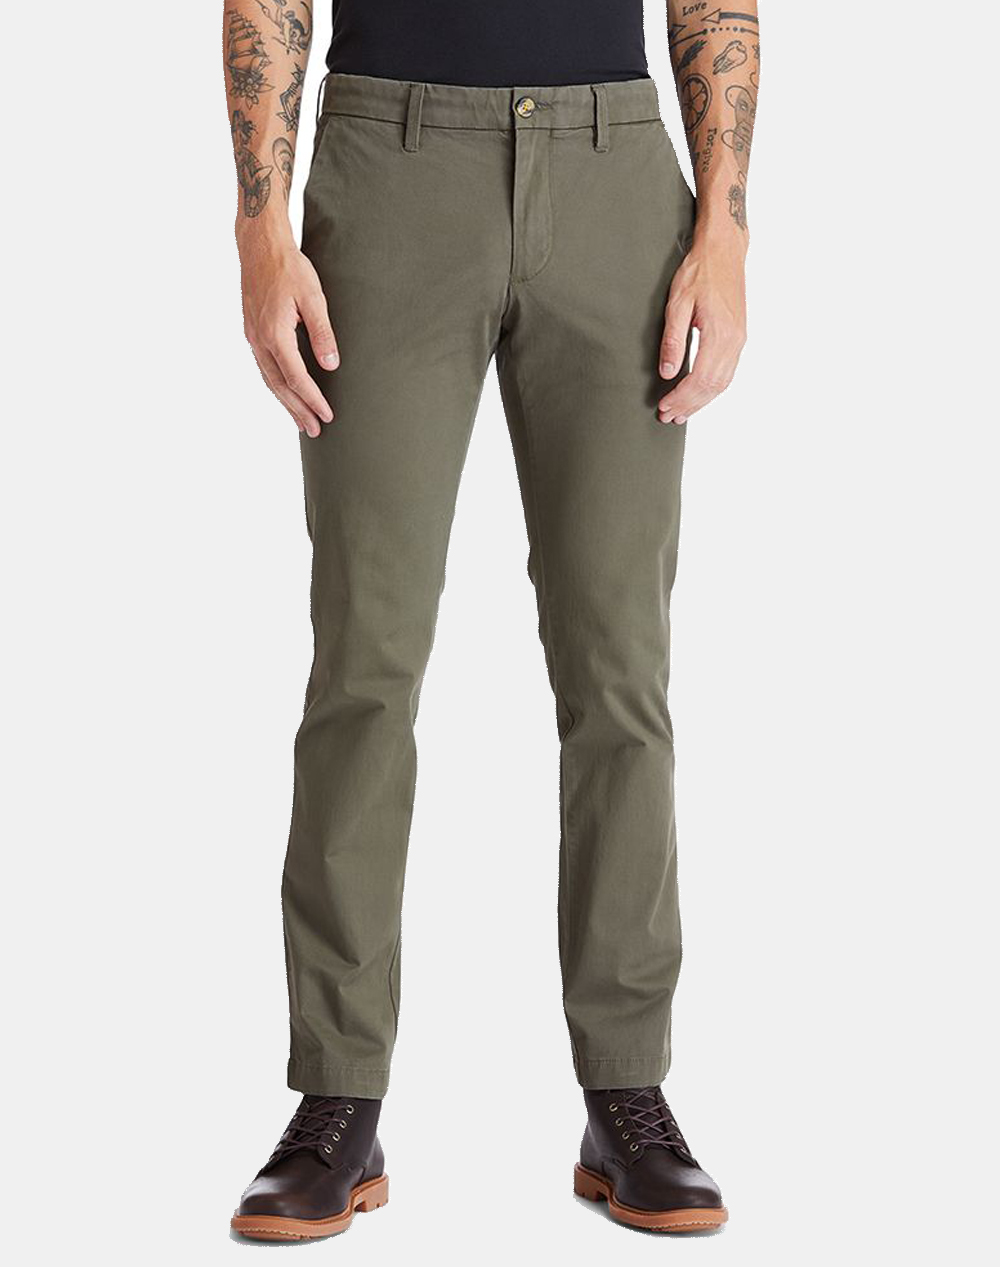 TIMBERLAND Stretch Twill Chino Pant (Slim) TB0A2BYY-A58 Olive